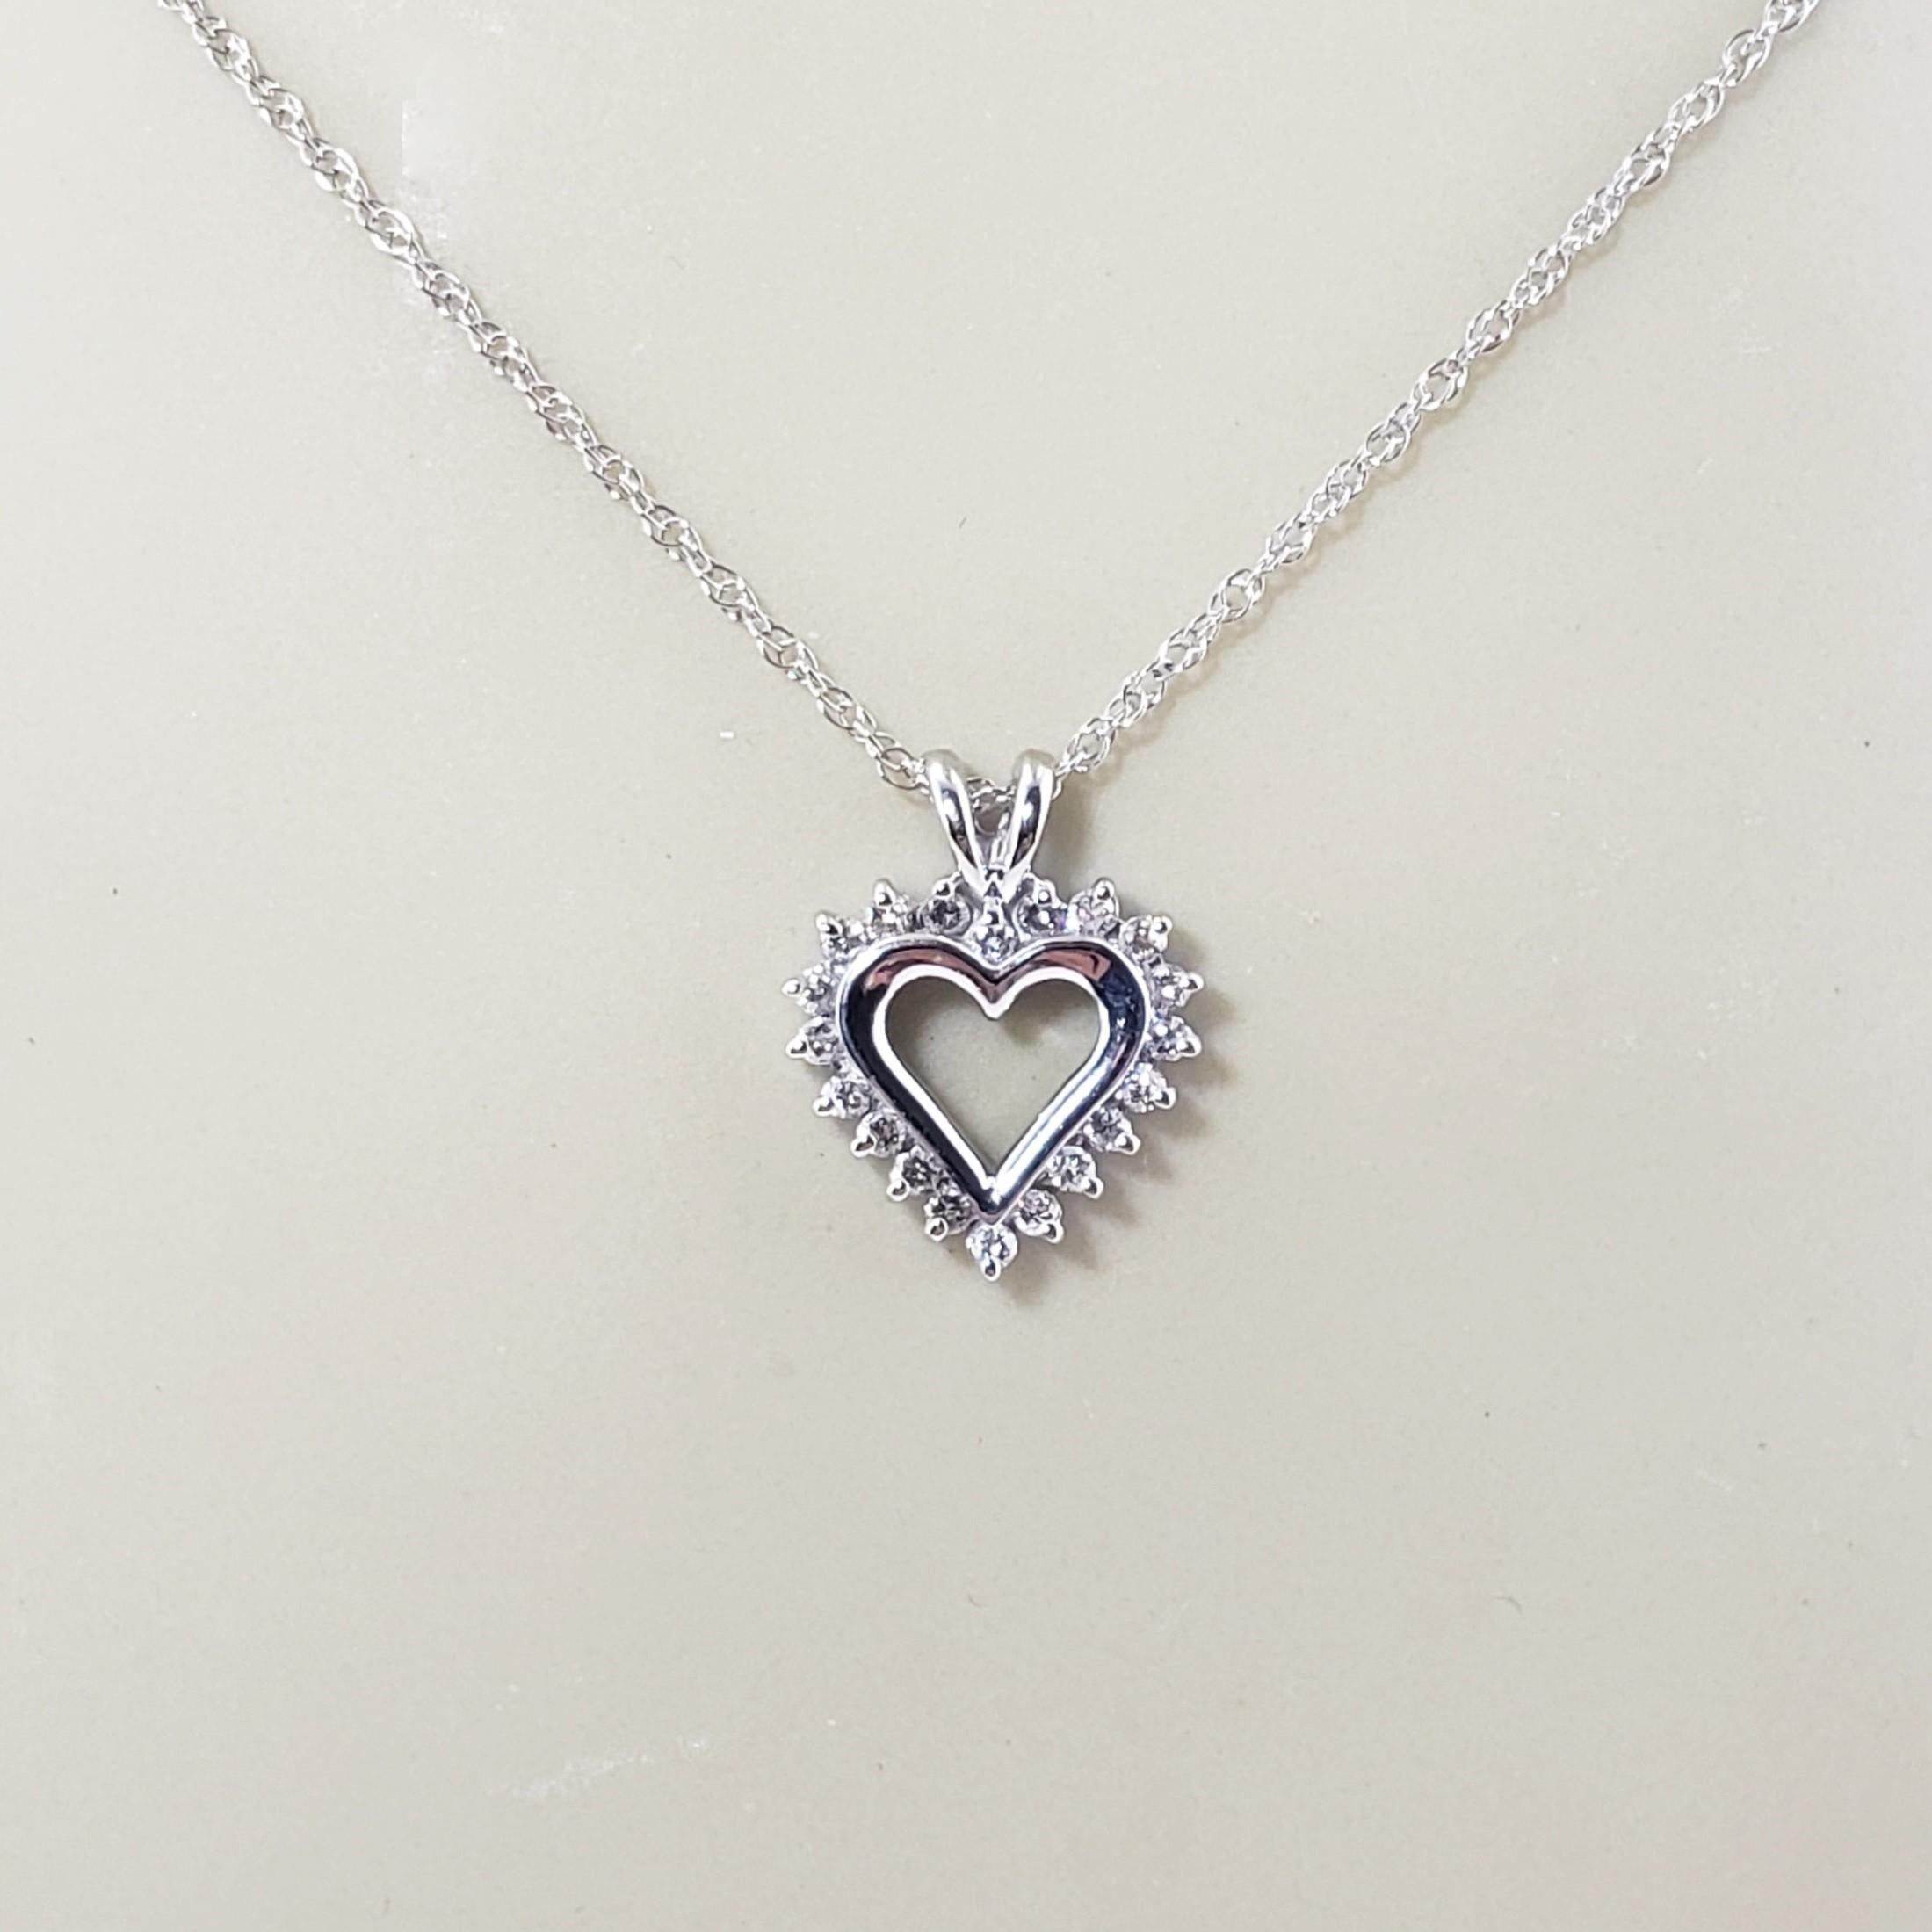 Vintage 14 Karat White Gold Diamond Heart Pendant Necklace-

This sparkling heart pendant features 20 round brilliant cut diamonds set in elegant 14K white gold. Suspends from a classic cable chain.

Approximate total diamond weight: .20